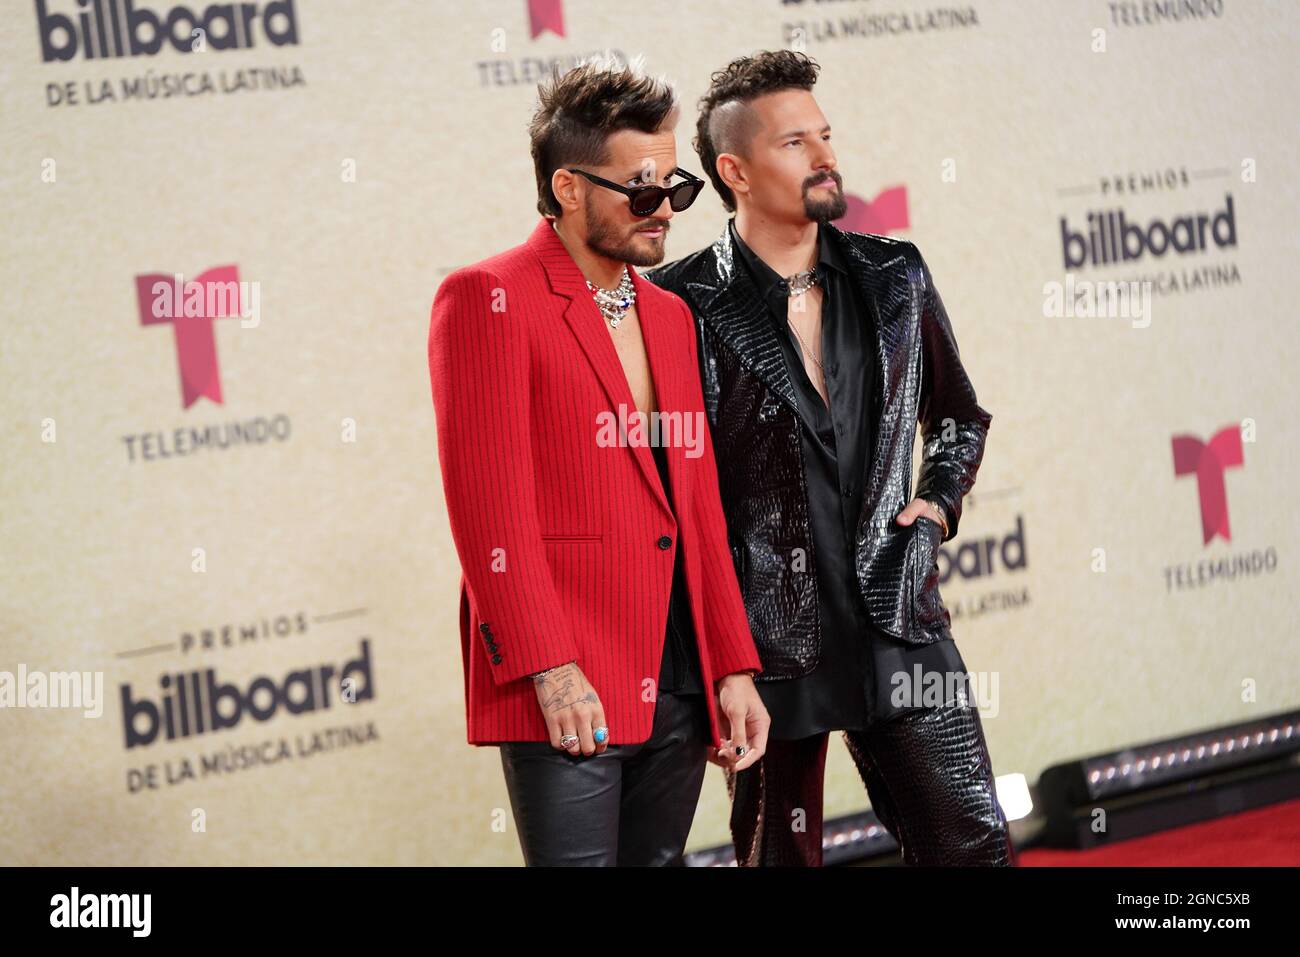 Miami, United States Of America. 24th Sep, 2021. PREMIOS BILLBOARD DE LA MÚSICA LATINA 2021 -Mau y Ricky are seen on the red carpet at the Watsco Center in Coral Gables, FL on September 23, 2021 (Photo by Alberto E. Tamargo/Sipa USA) Credit: Sipa USA/Alamy Live News Stock Photo